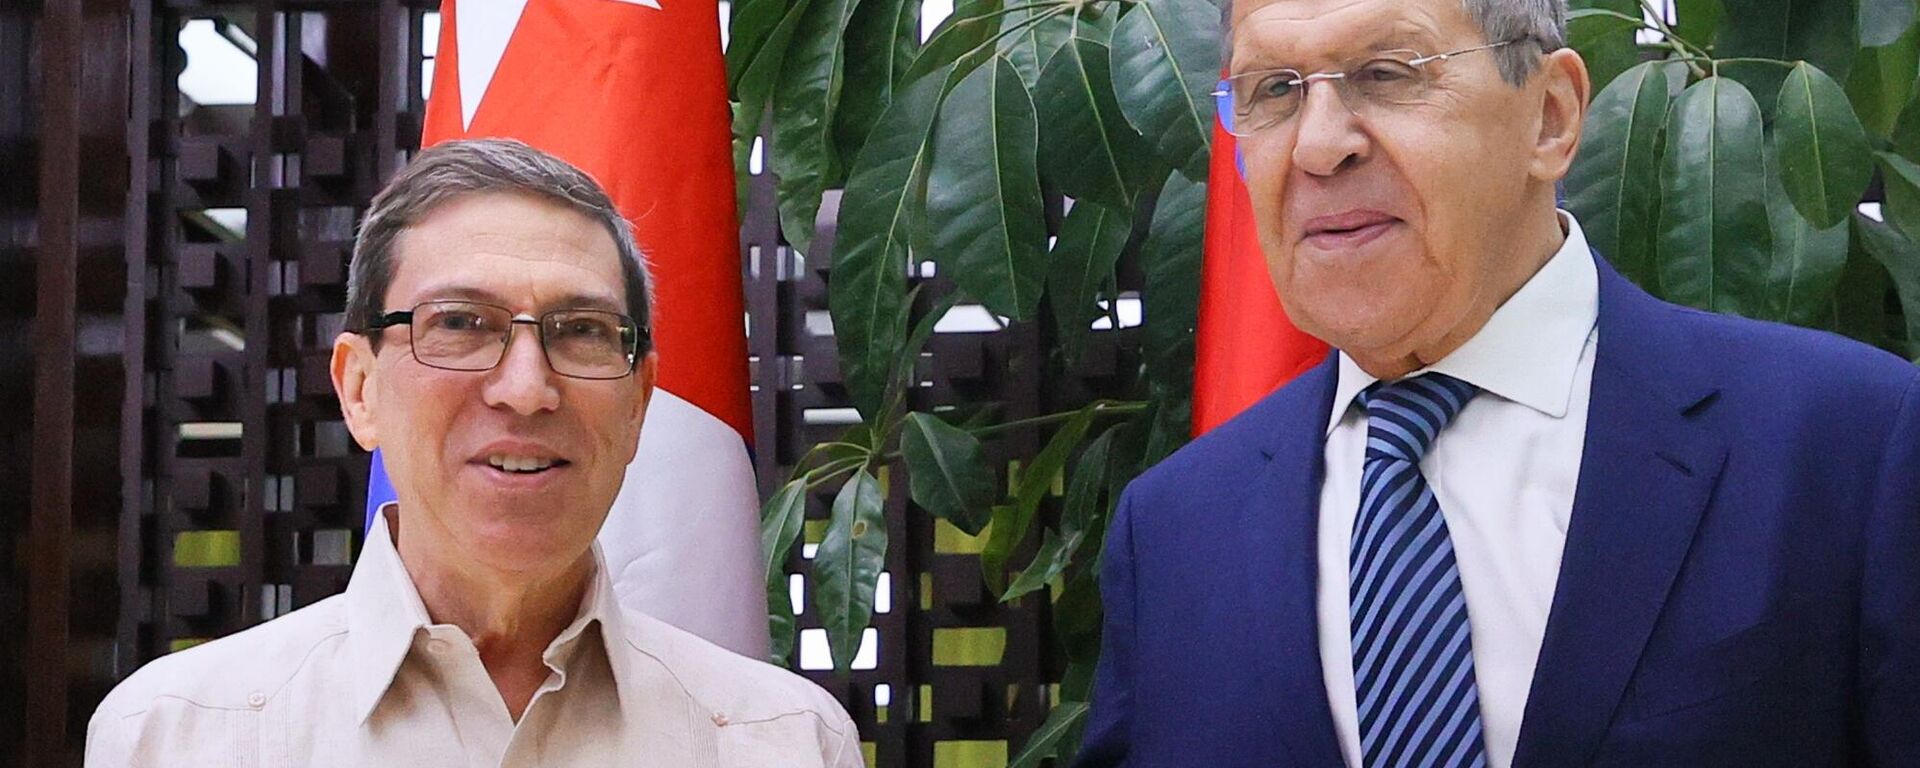 Russian Foreign Minister Sergei Lavrov and his Cuban counterpart, Foreign Minister Bruno Rodriguez. - Sputnik International, 1920, 20.04.2023